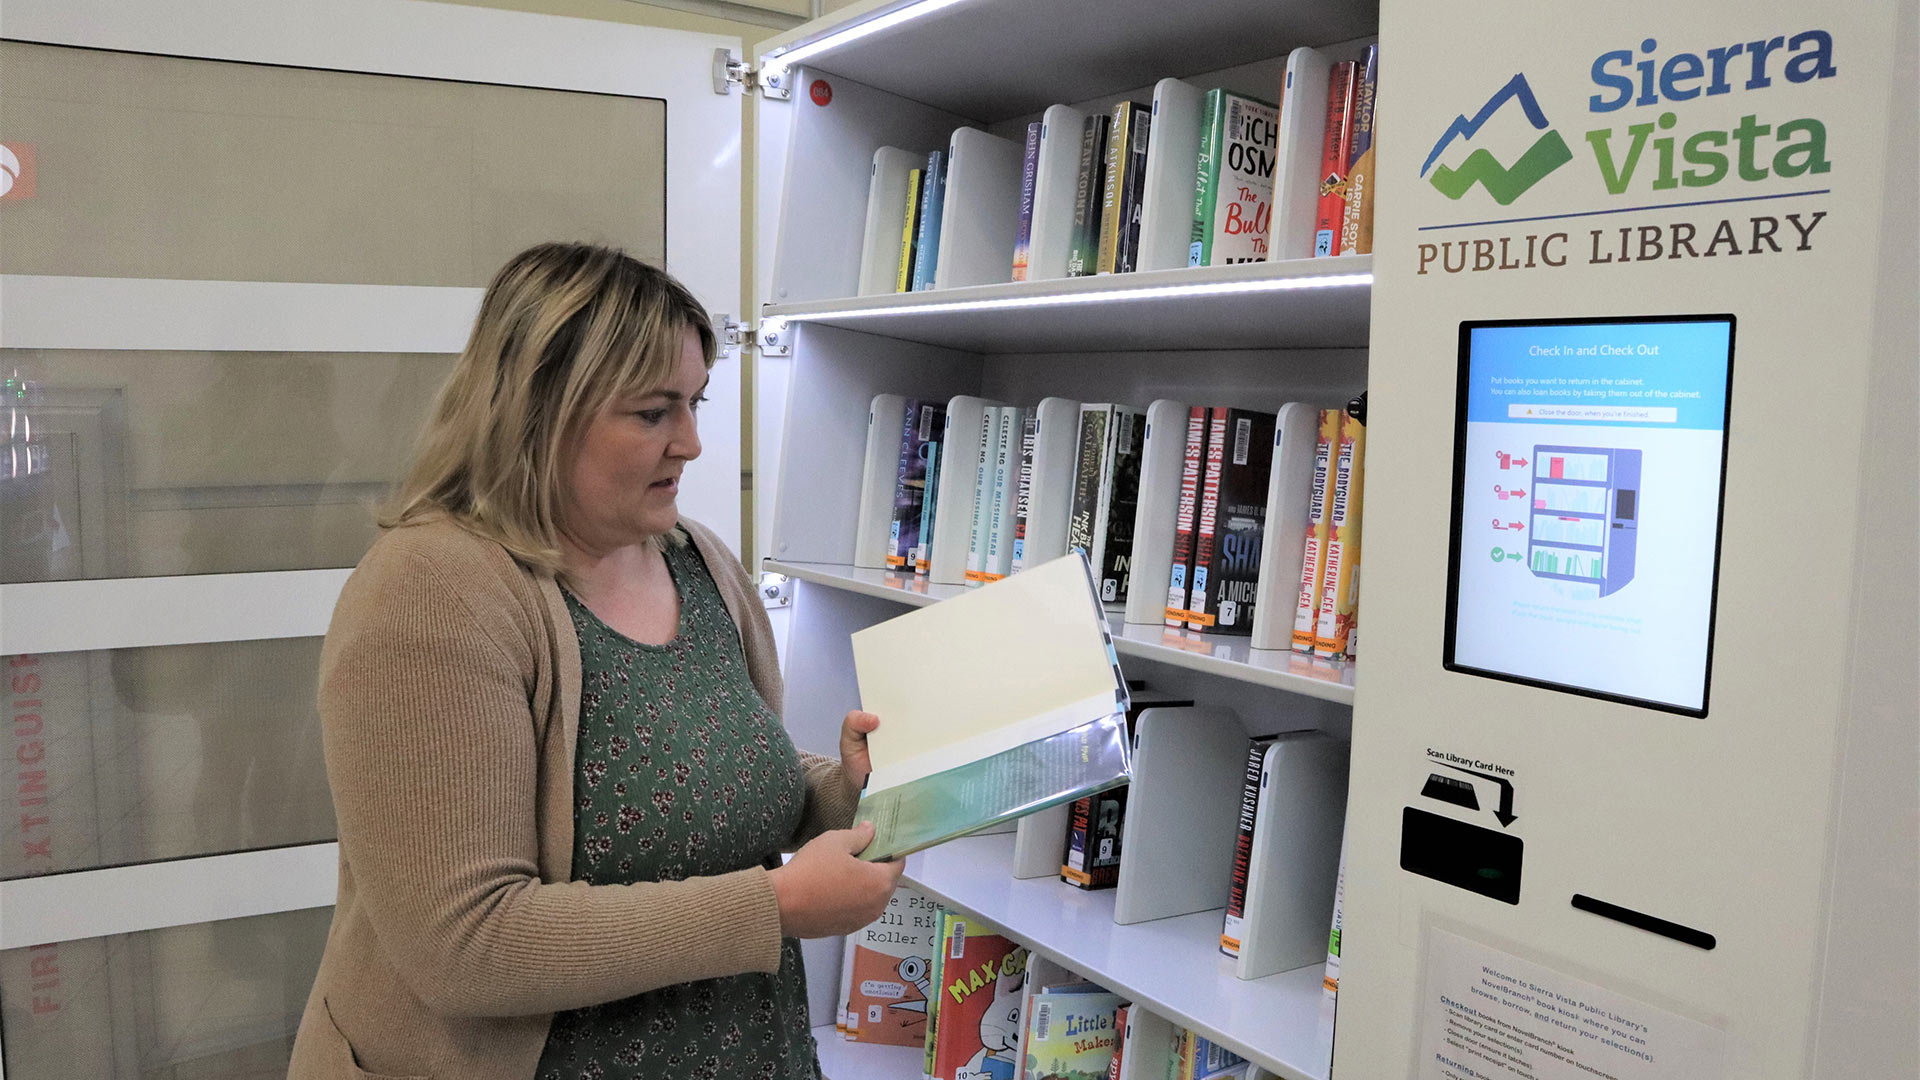 Sierra Vista Public Library Manager Emily Duchon said that the goal was to make books more accessible.